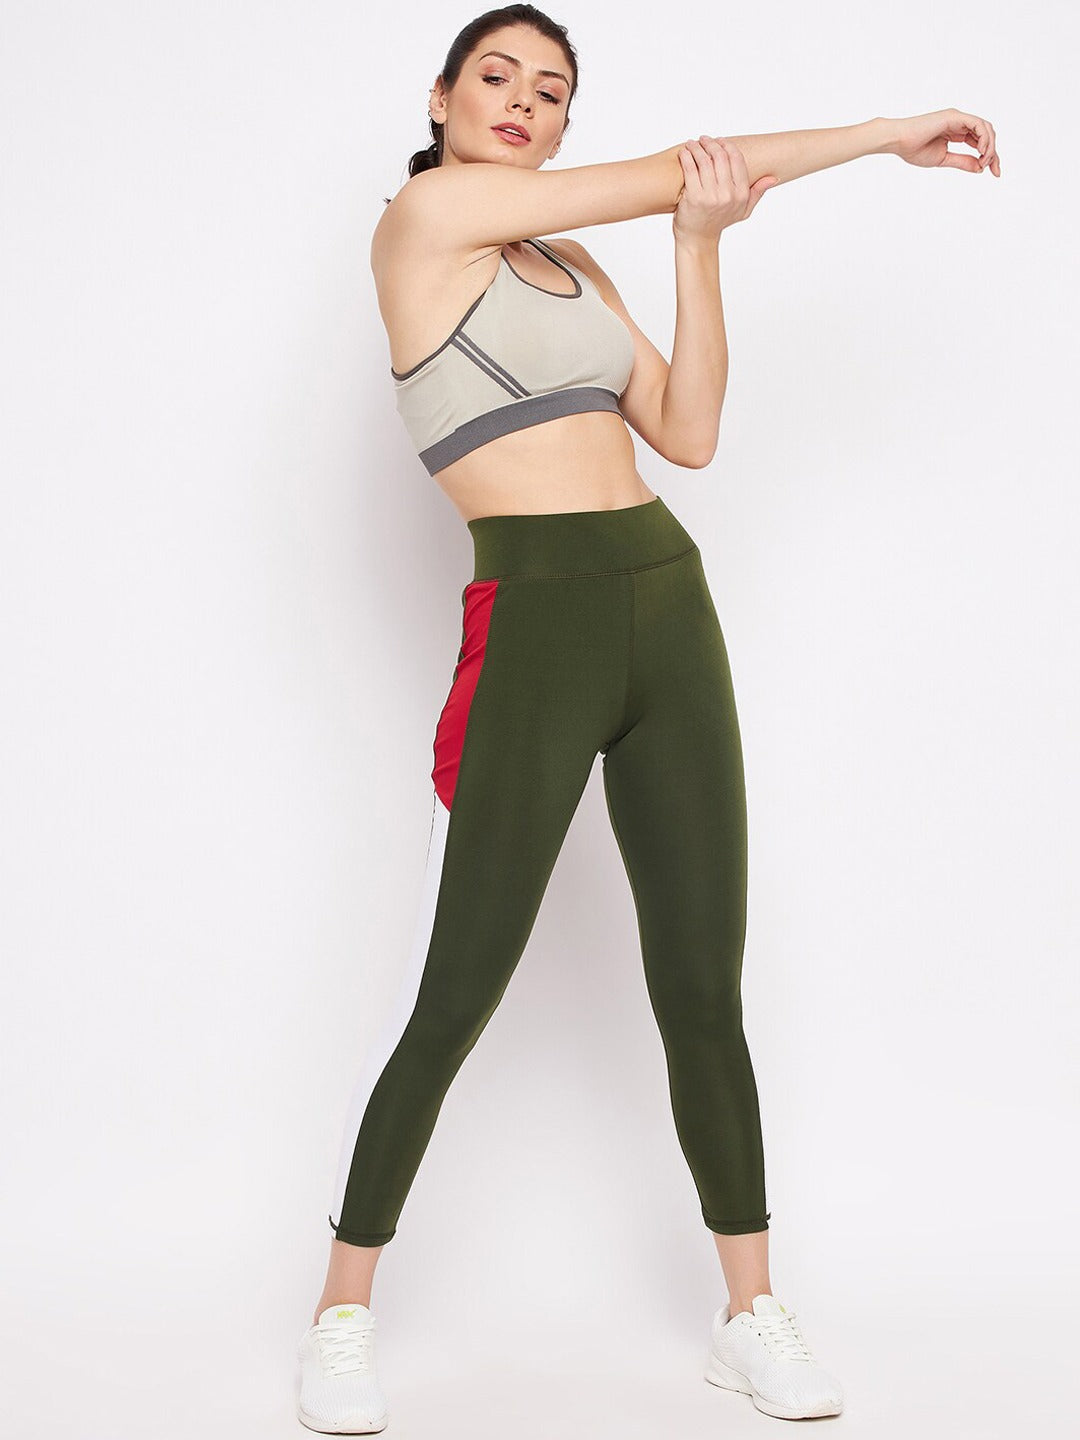 Buy Leggings for Womens and Girls Olive Green Color Churidar Sizes :- XXL  (XXL, Olive Green) at Amazon.in